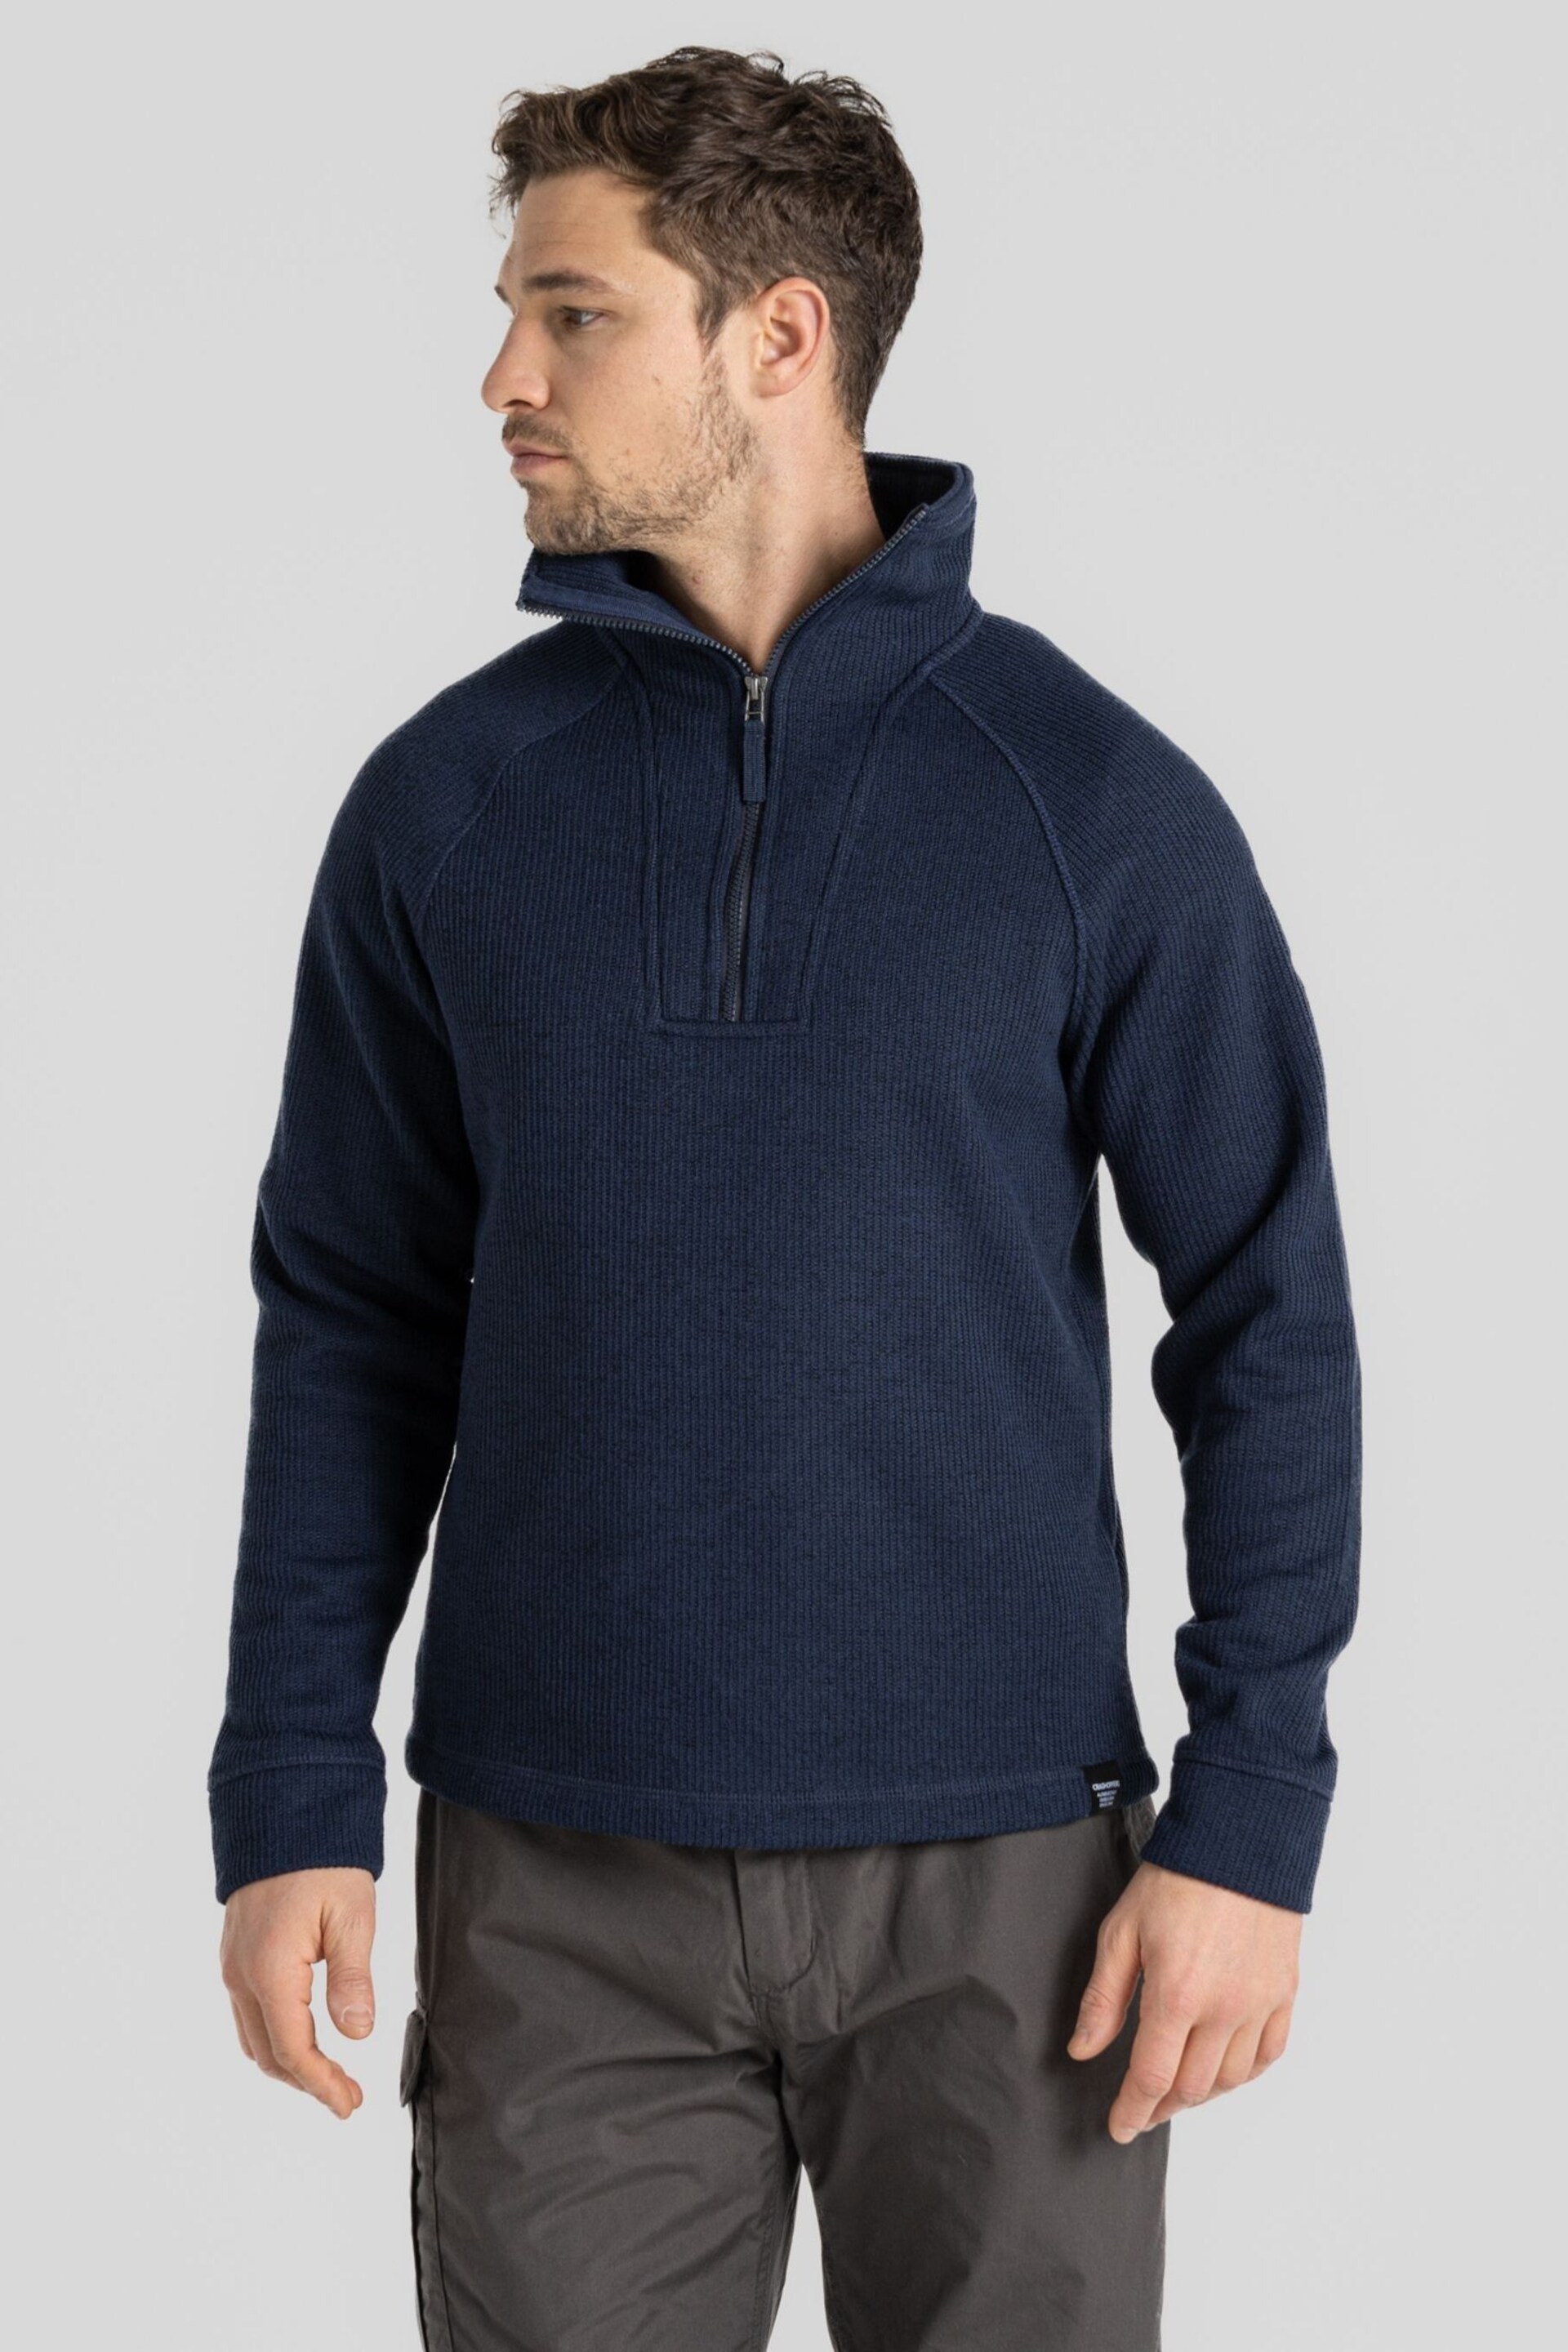 Craghoppers Blue Wole Half Zip Top - Image 2 of 7